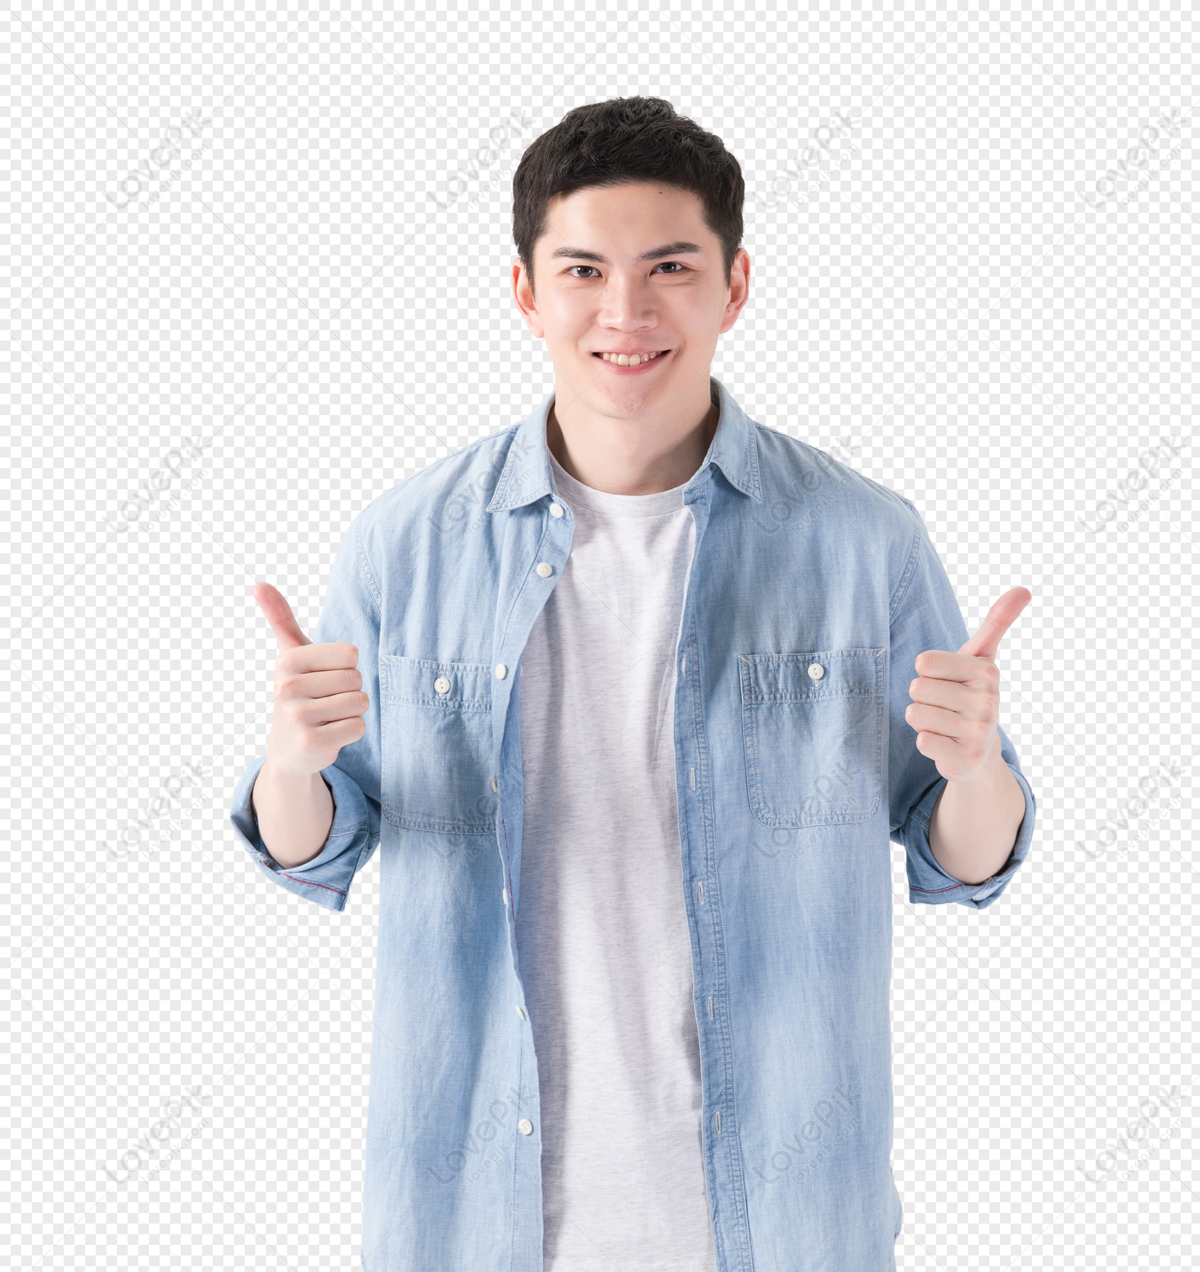 Smiling Man With Thumbs Up